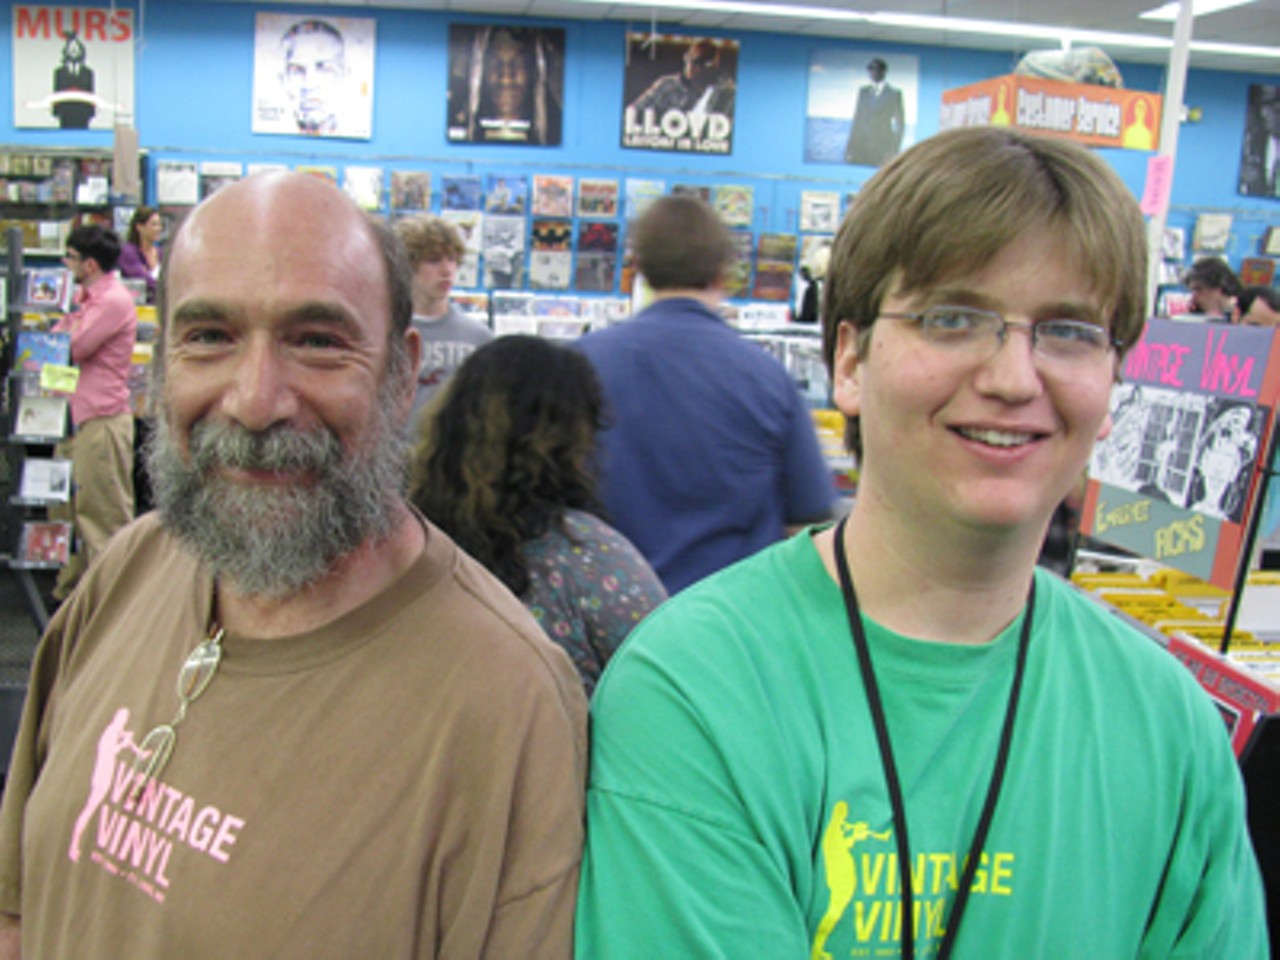 Vintage vinyl co-owner Lew Prince and his son, Sam, who works at the store.